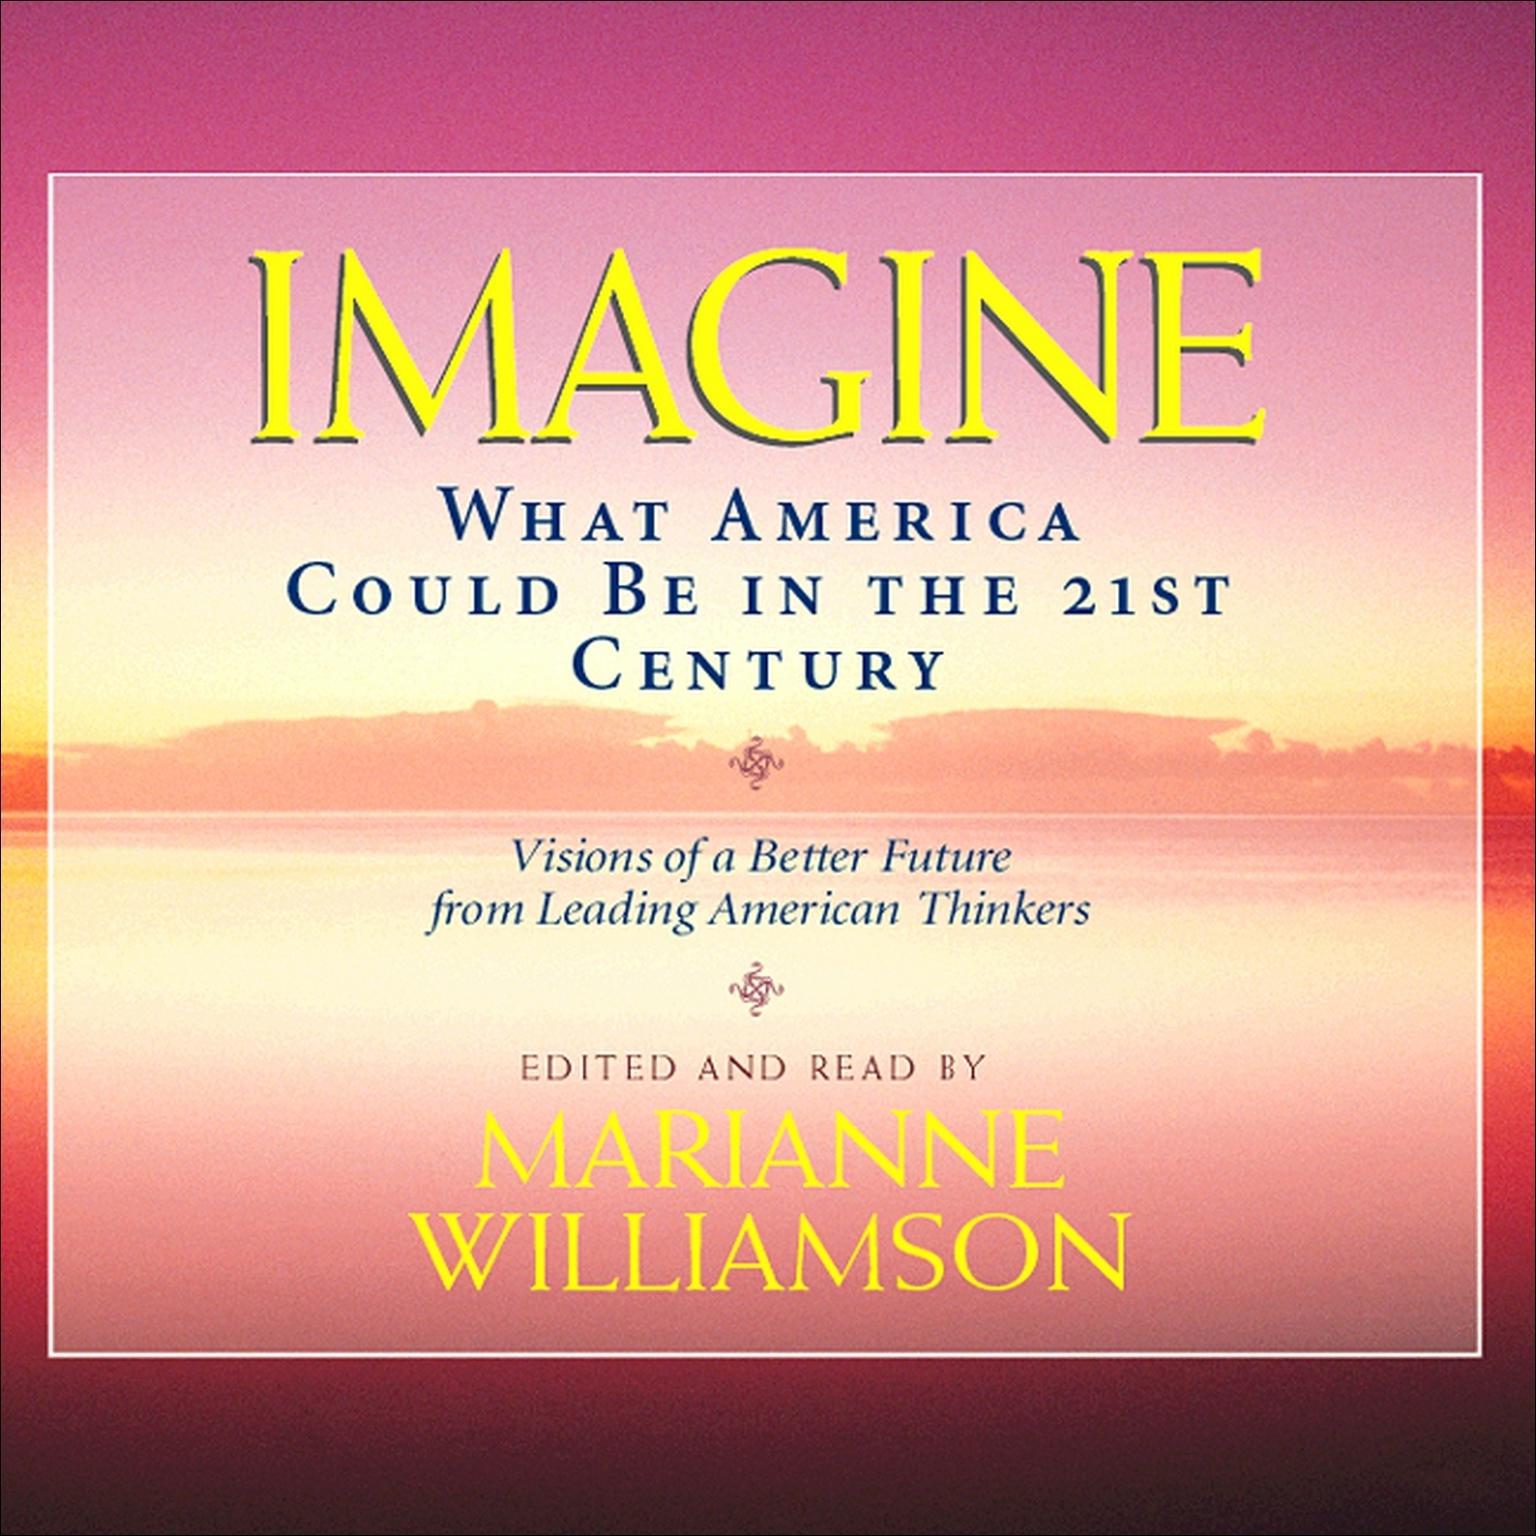 Imagine (Abridged): What America Could Be in the 21st Century Audiobook, by Marianne Williamson